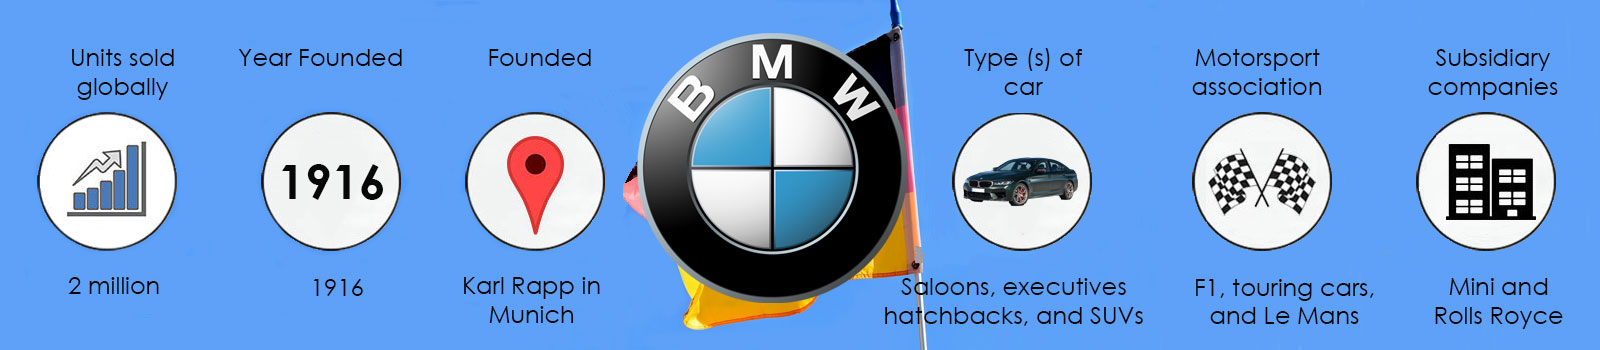 The history of BMW infographic showing sales, founding information and car facts